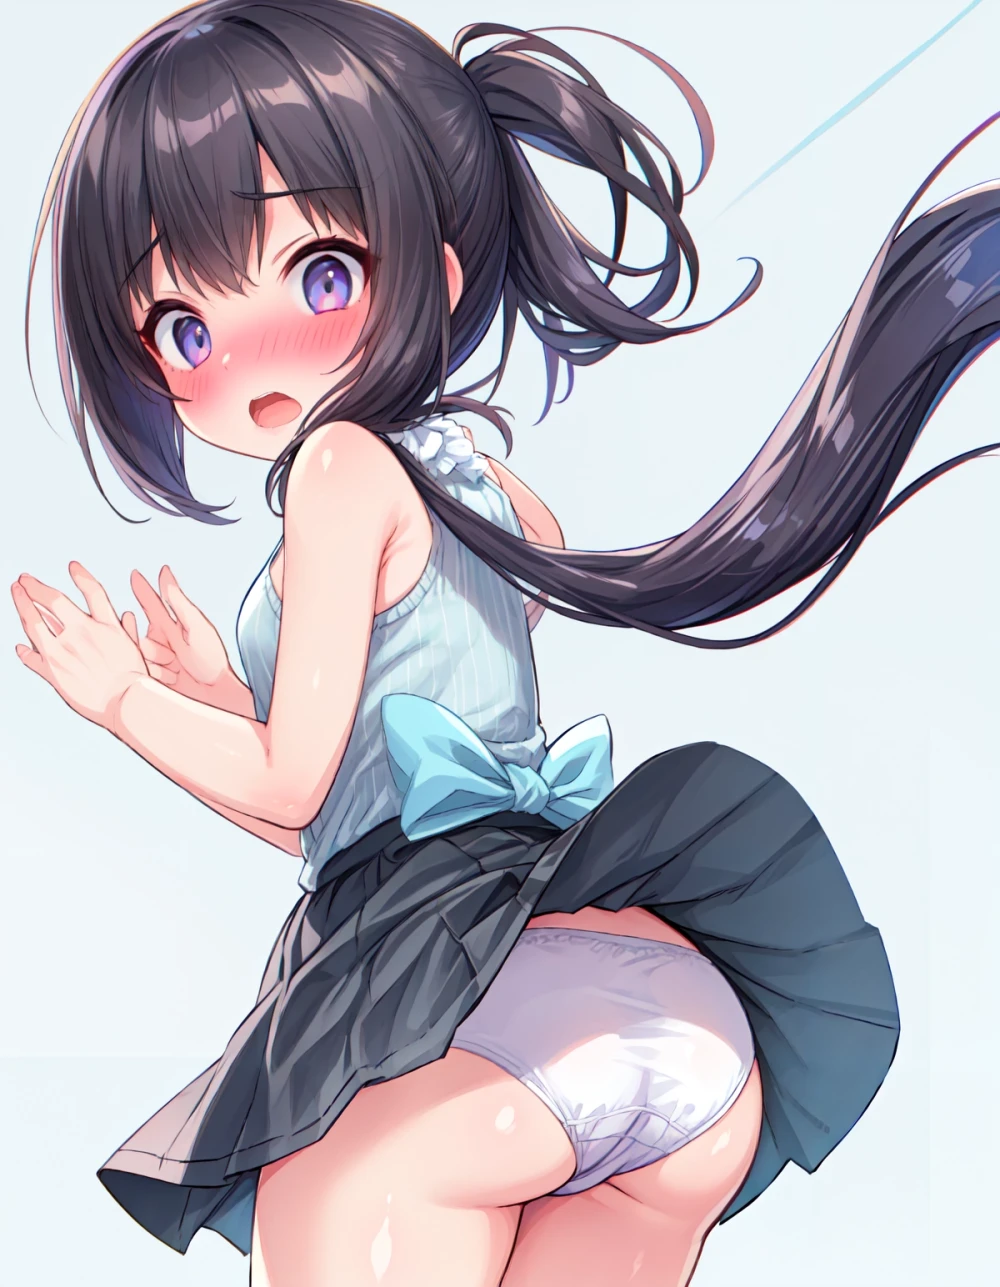 pantyshot-anime-style-all-ages-12